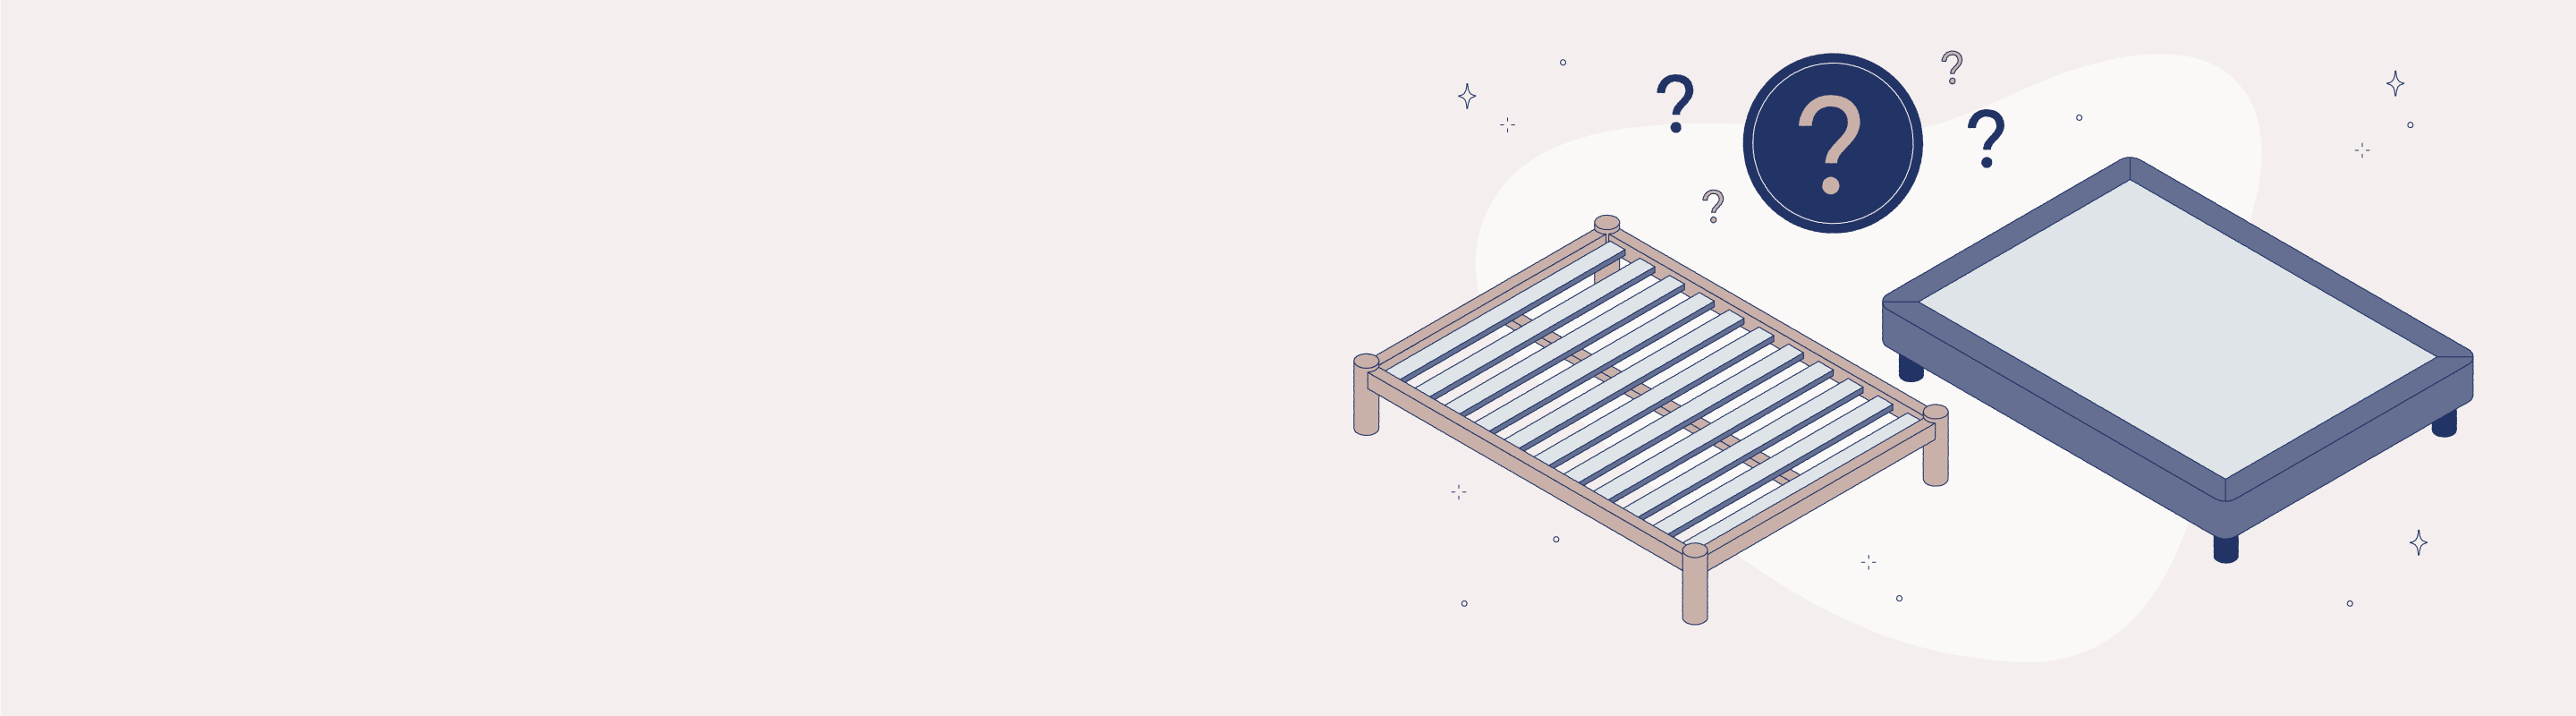 how to choose a bed frame